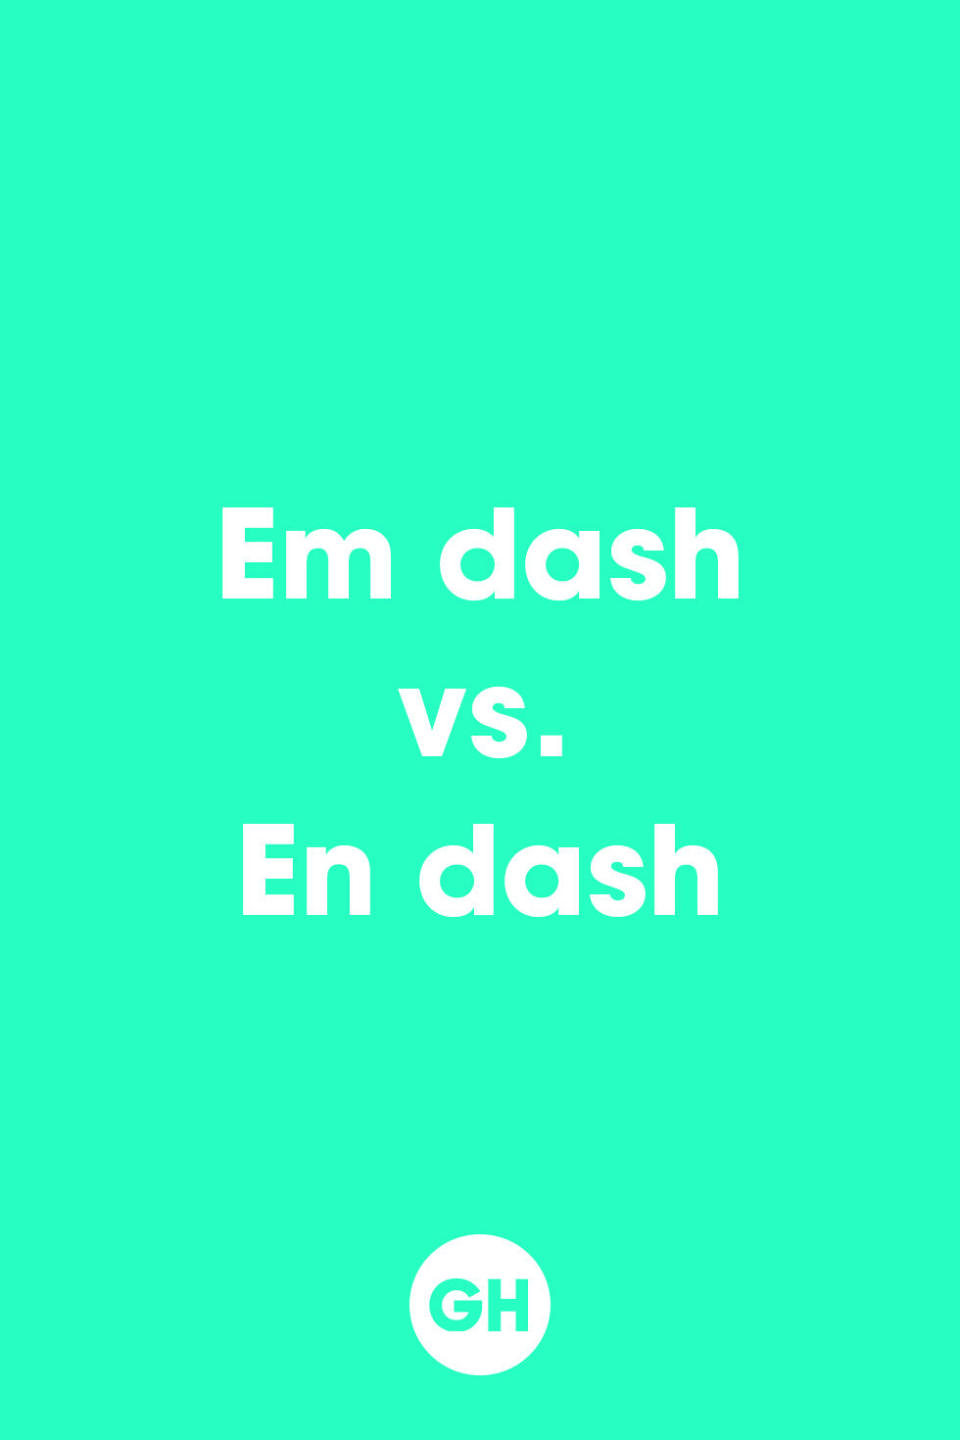 <p>There is a feather of a difference between an em dash and an en dash. An em dash ("-") is the longer of the two dashes, and it takes the place of commas, parentheses or colons. The en dash ("-") is used to represent a range of numbers (10-15), dates or time. </p>